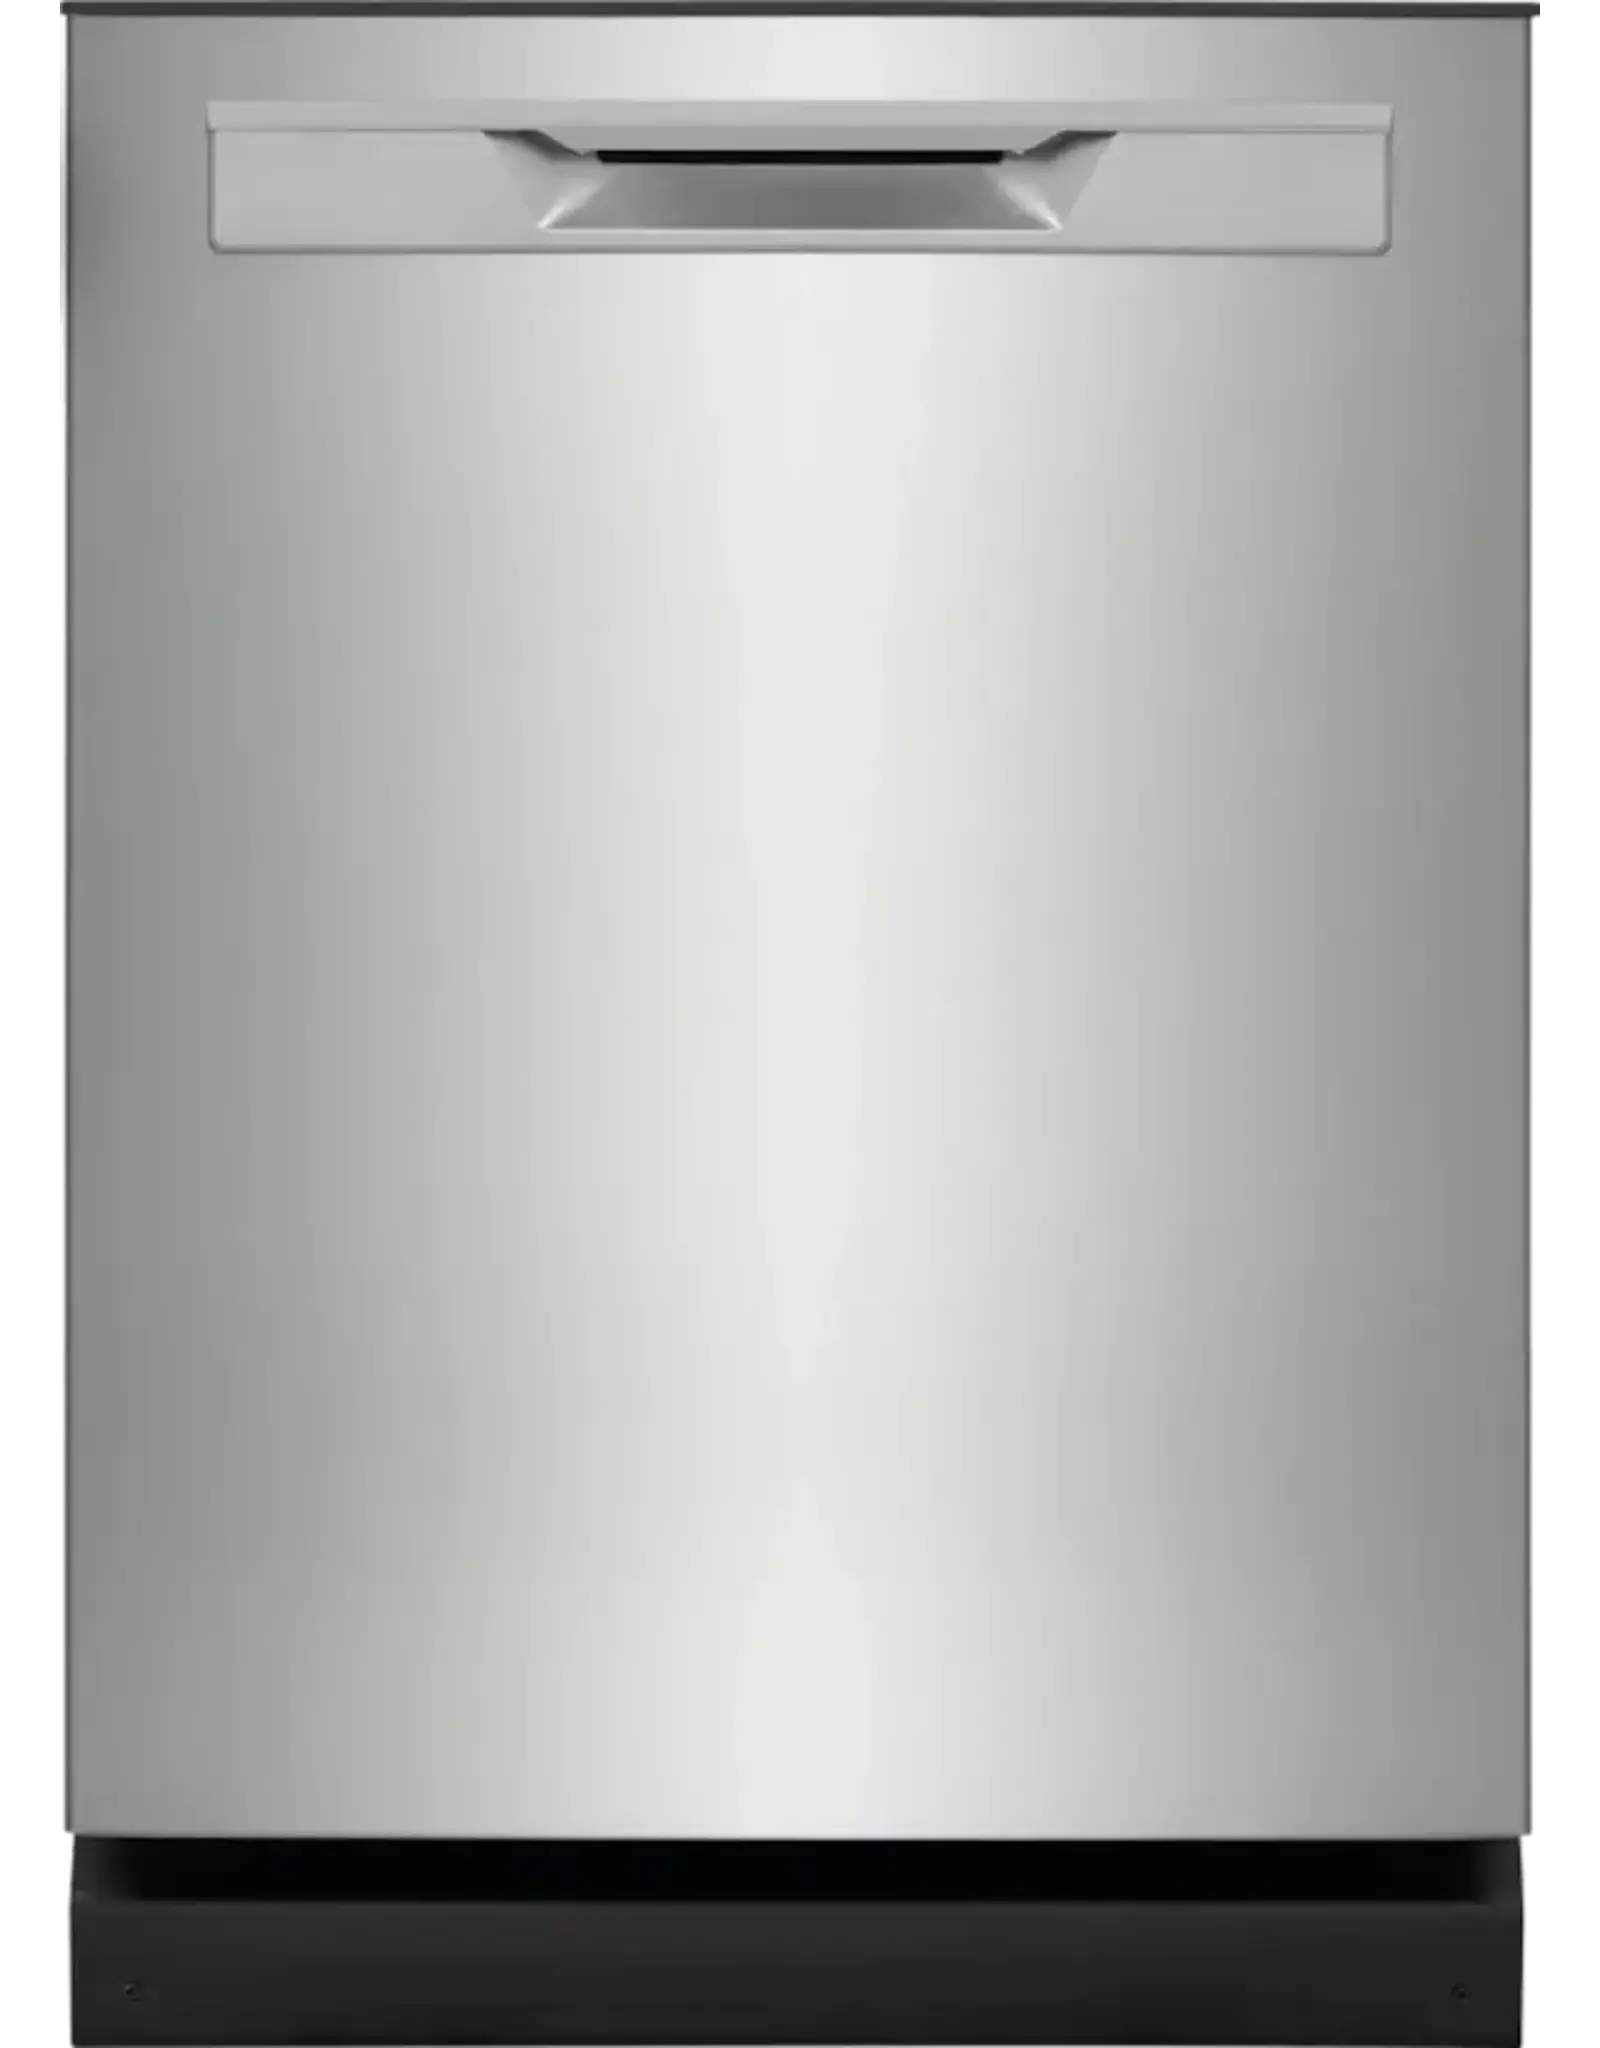 FRIGIDAIRE GDPP4515AF Frigidaire Gallery Top Control 24-in Built-In Dishwasher (Fingerprint Resistant Stainless Steel) ENERGY STAR, 52-dBA